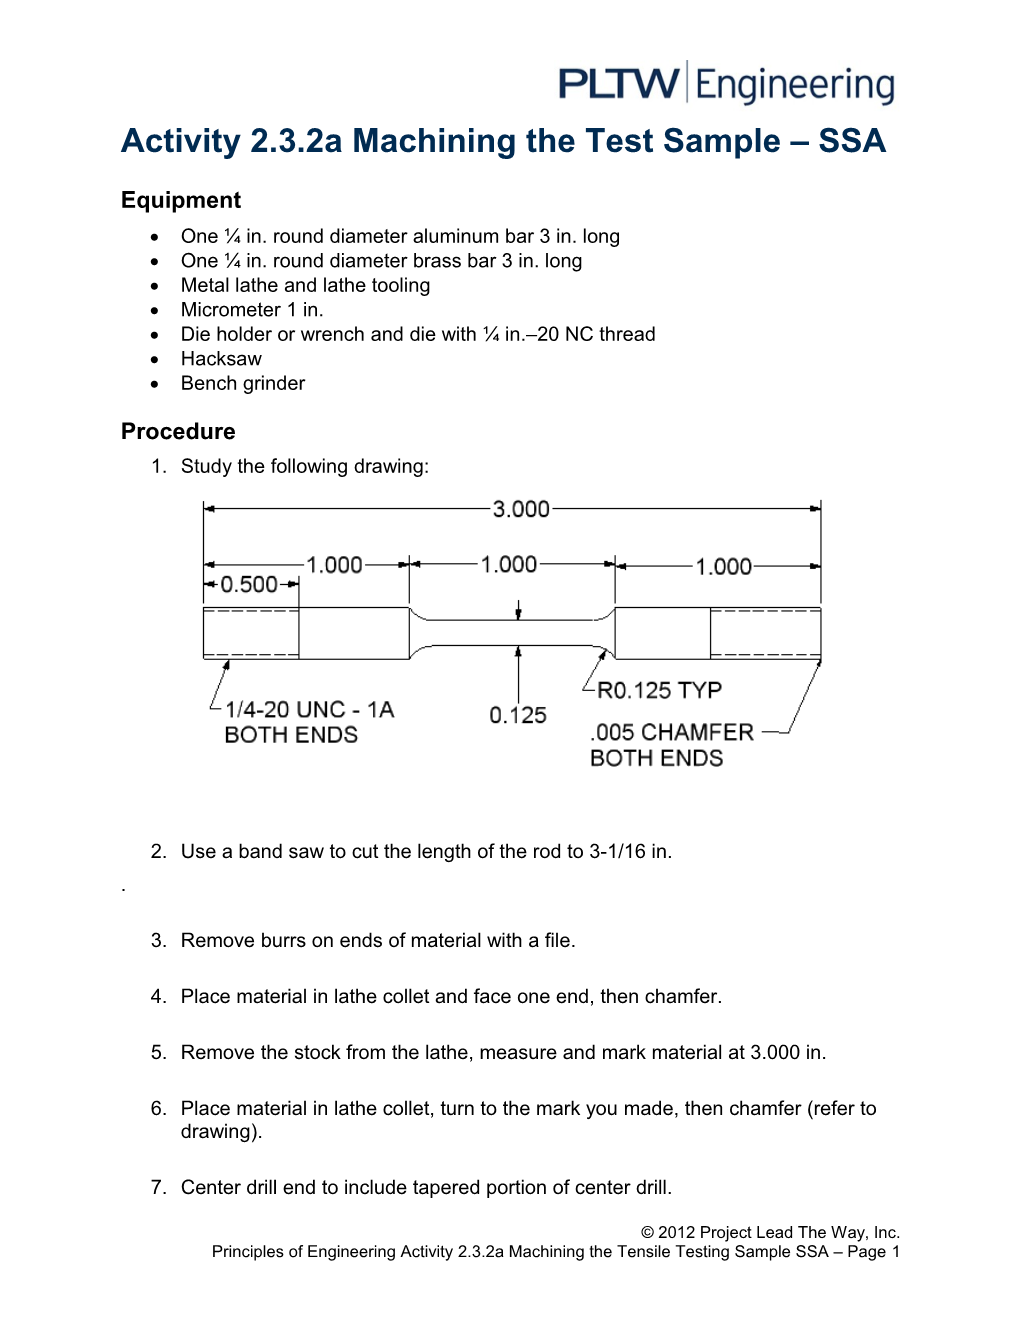 Activity 2.3.2A - Machining the Test Sample - SSA